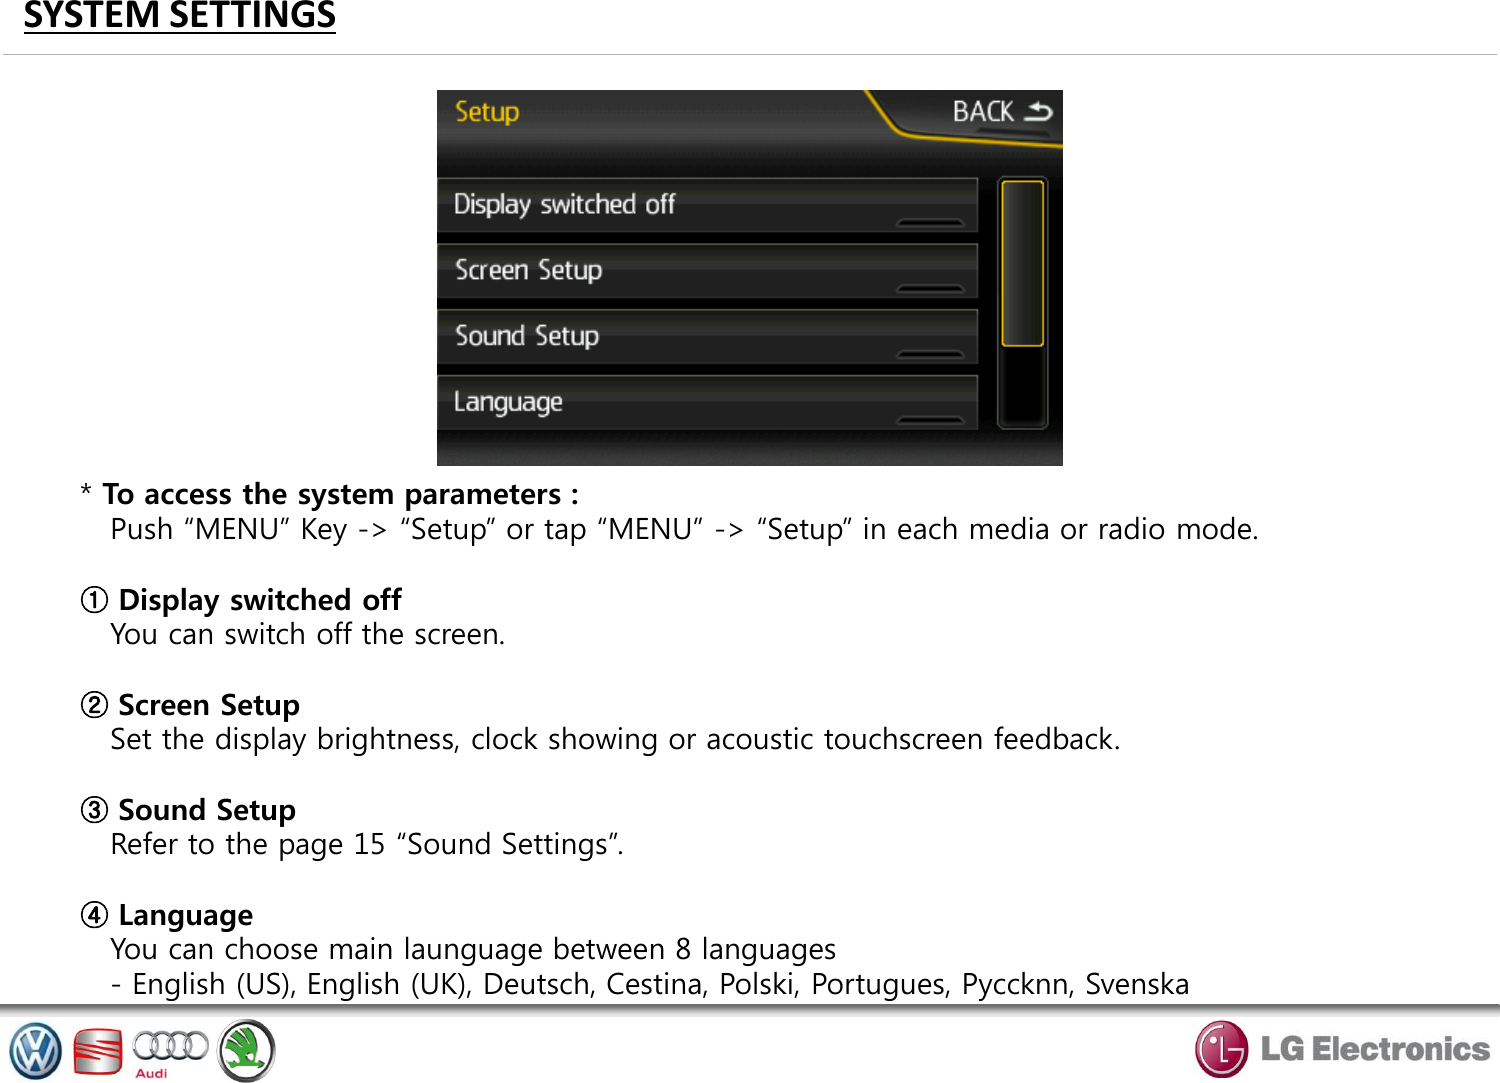 SYSTEM SETTINGS * To access the system parameters :    Push “MENU” Key -&gt; “Setup” or tap “MENU” -&gt; “Setup” in each media or radio mode.  ① Display switched off    You can switch off the screen.  ② Screen Setup    Set the display brightness, clock showing or acoustic touchscreen feedback.  ③ Sound Setup    Refer to the page 15 “Sound Settings”.  ④ Language    You can choose main launguage between 8 languages    - English (US), English (UK), Deutsch, Cestina, Polski, Portugues, Pyccknn, Svenska  